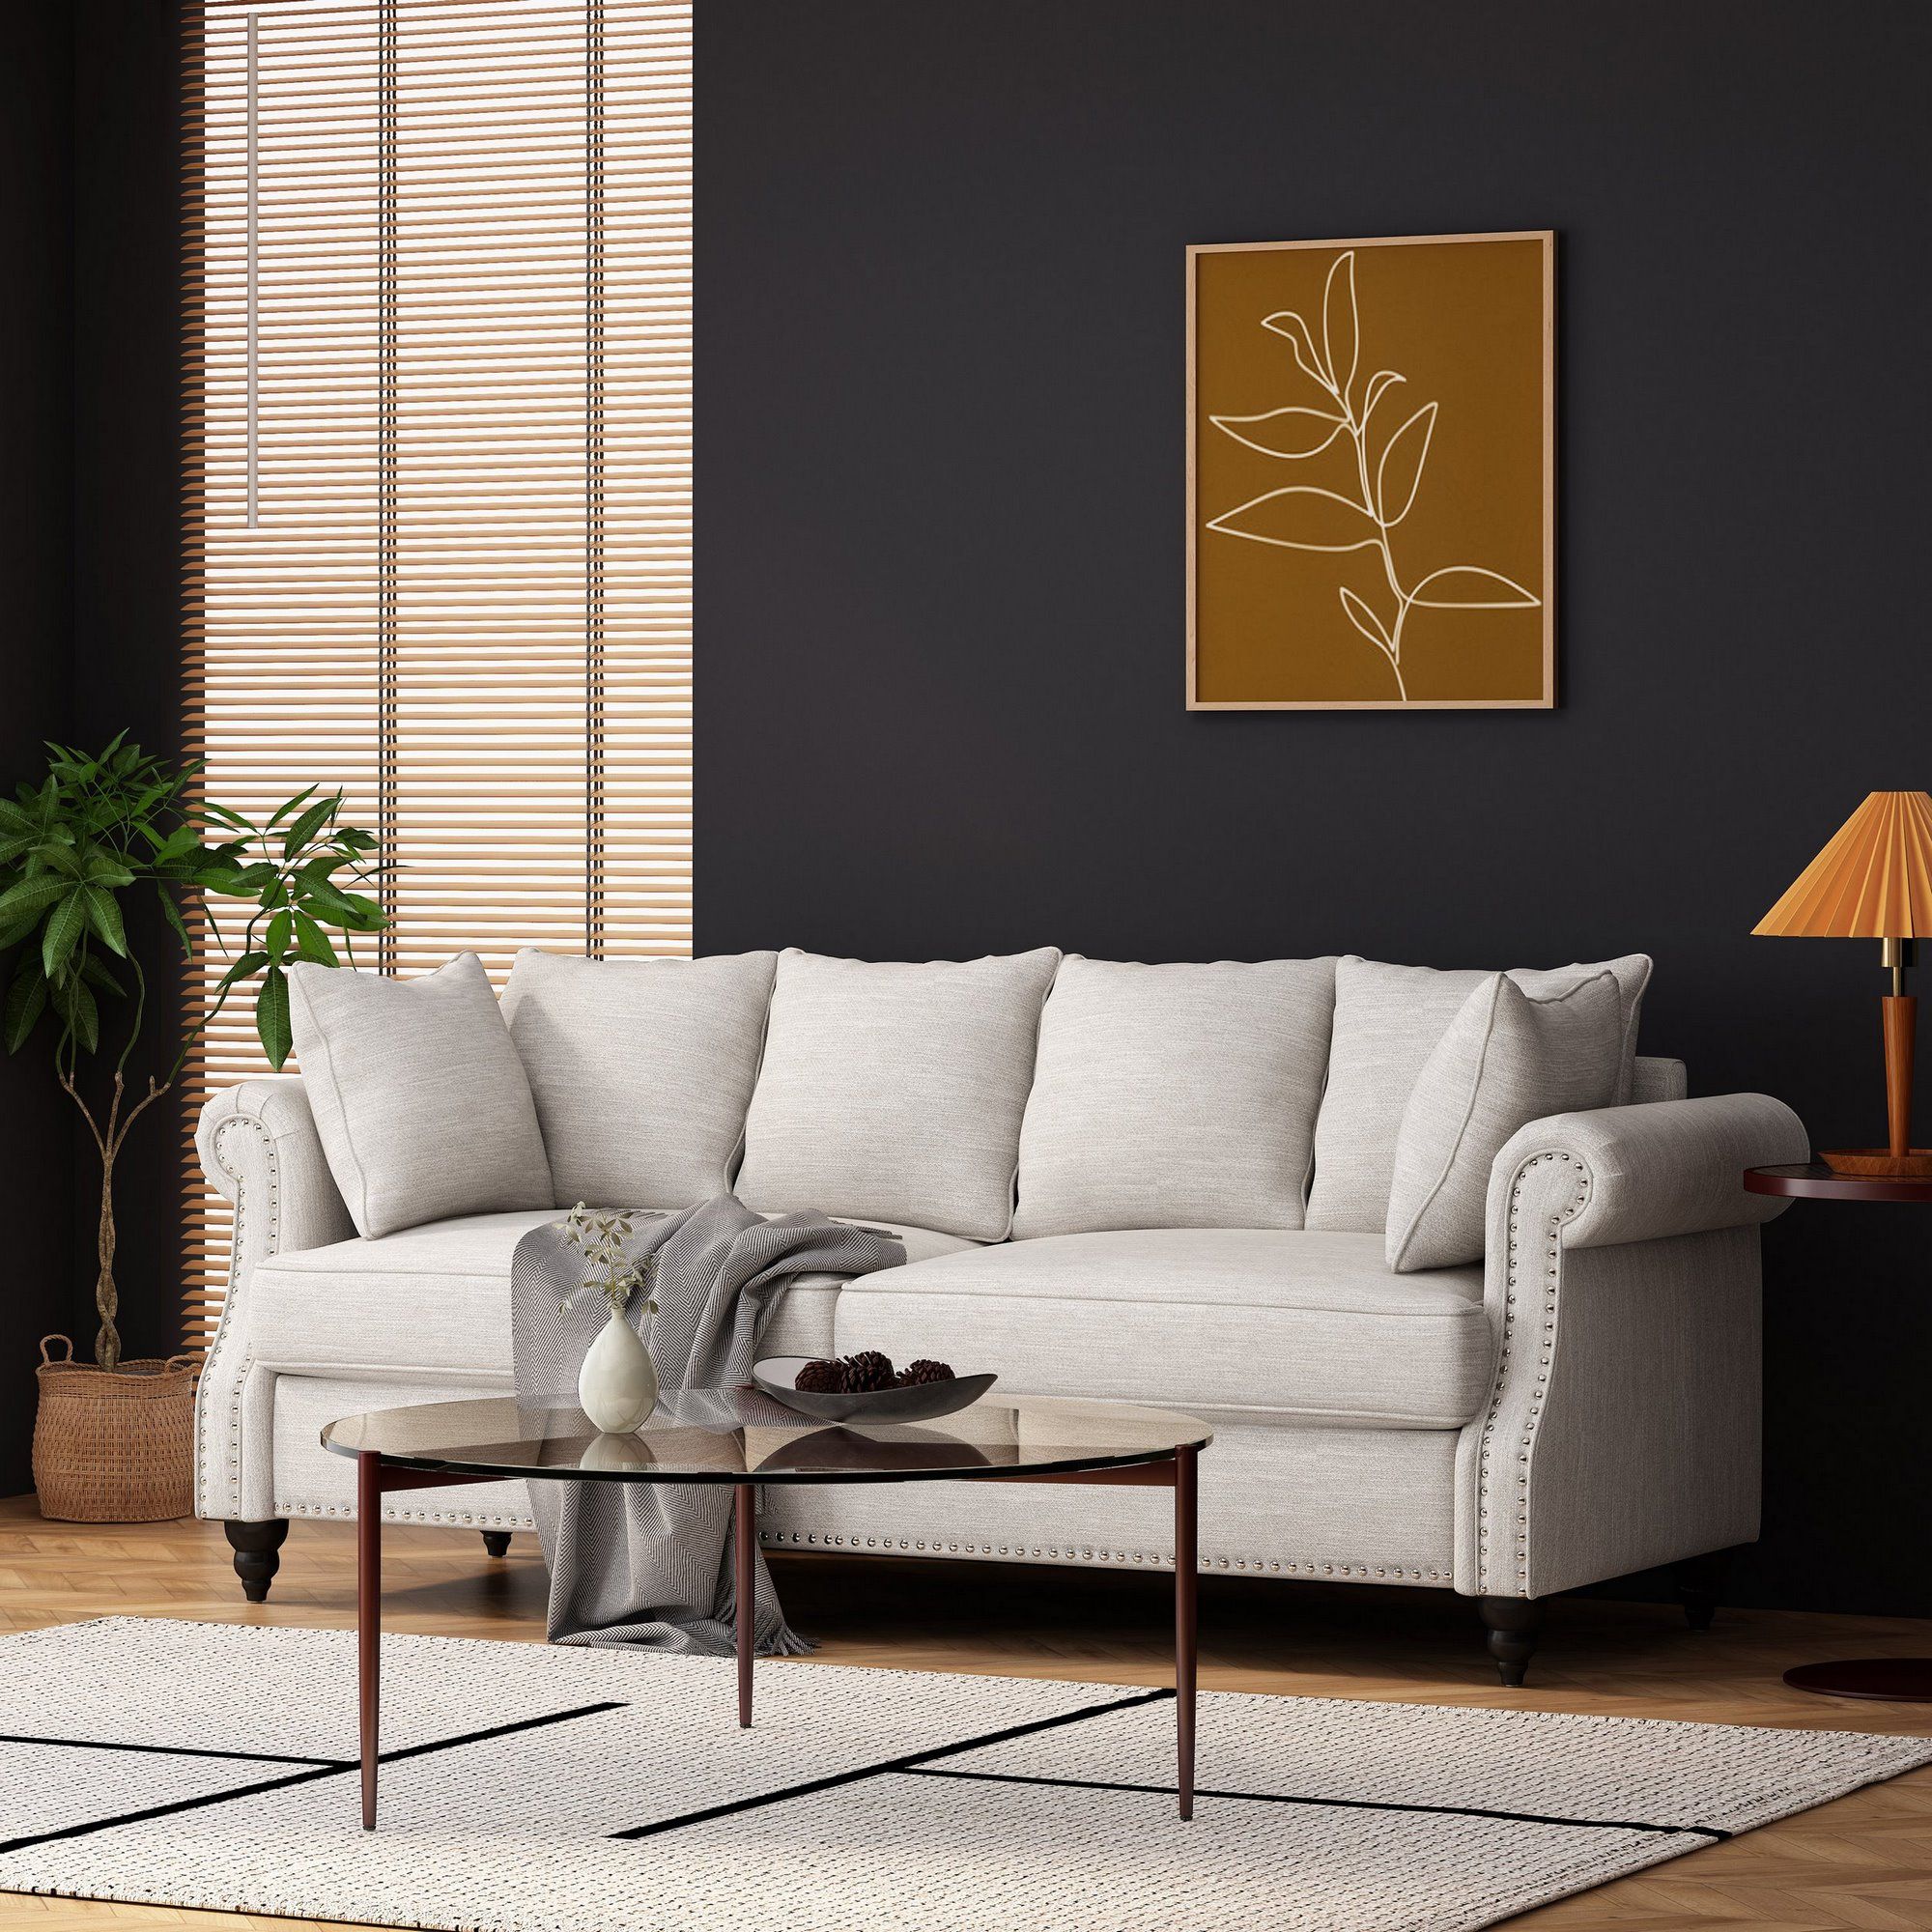 Manbow Contemporary Fabric Pillowback 3 Seater Sofa With Nailhead Trim,  Beige And Dark Brown Within Sofas With Pillowback Wood Bases (View 8 of 15)